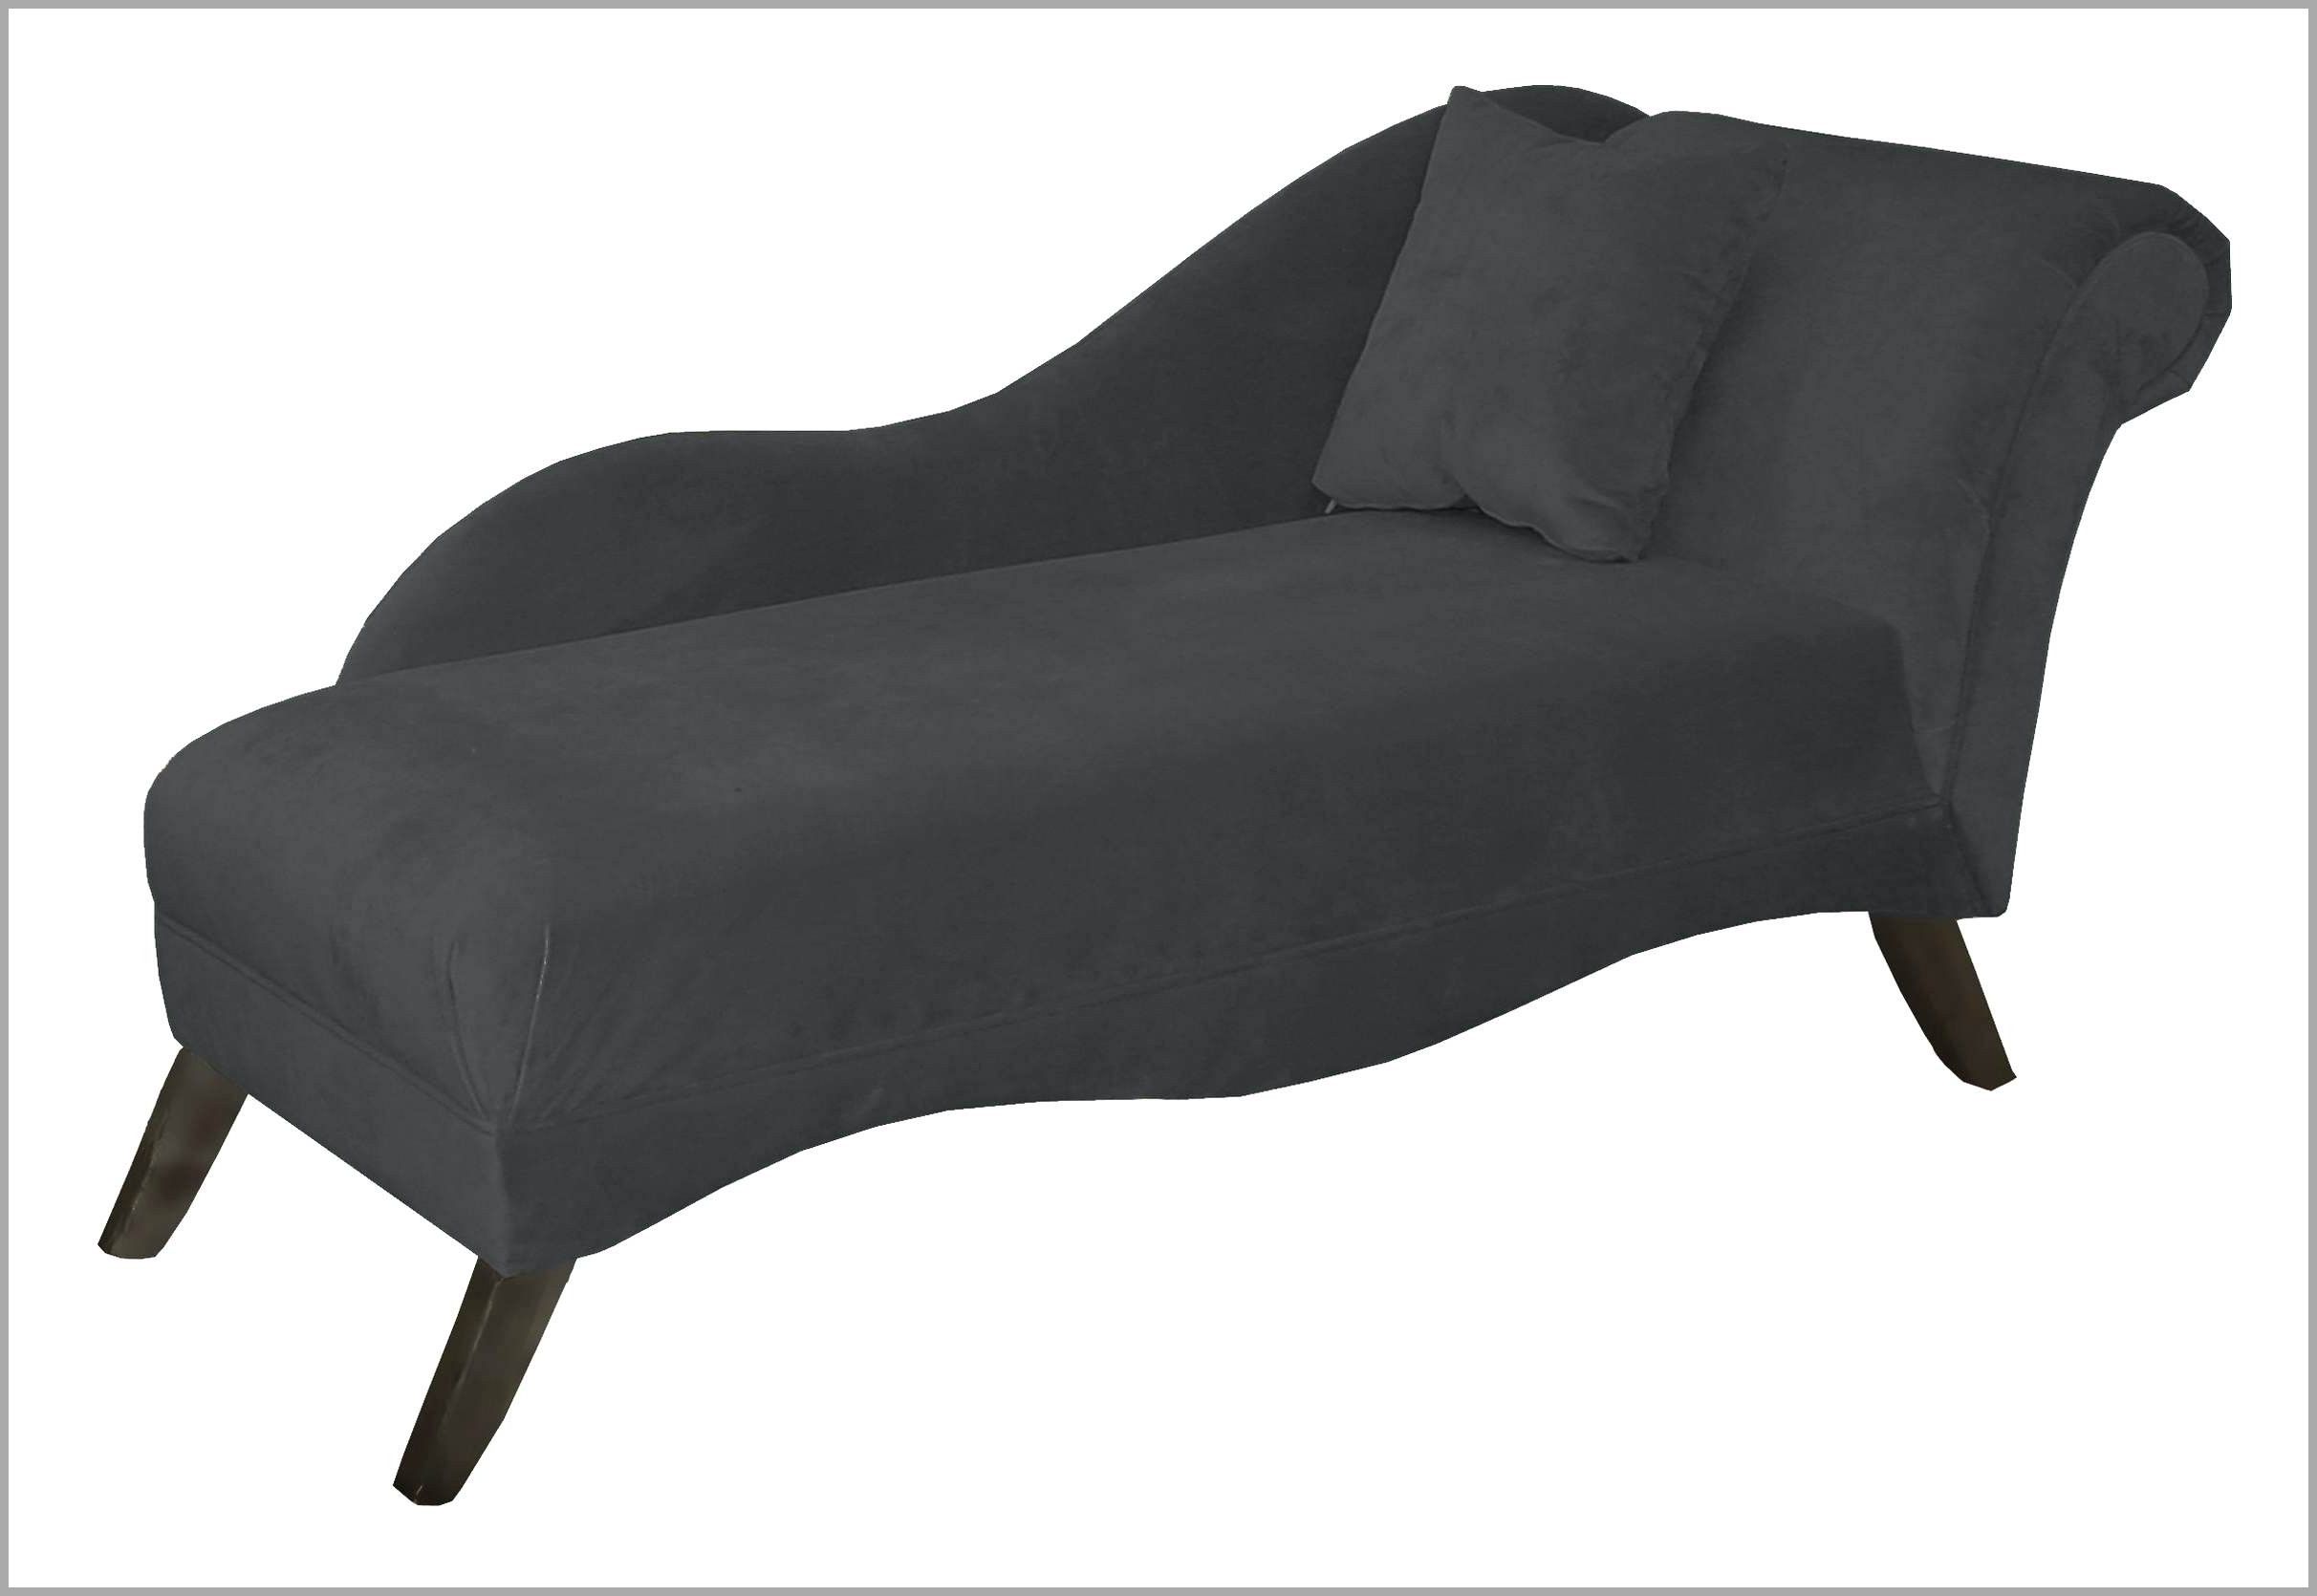 Current Agreeable Chaise Lounge Chair Walmart About Mainstays Ashwood Within Walmart Chaise Lounges (Photo 8 of 15)